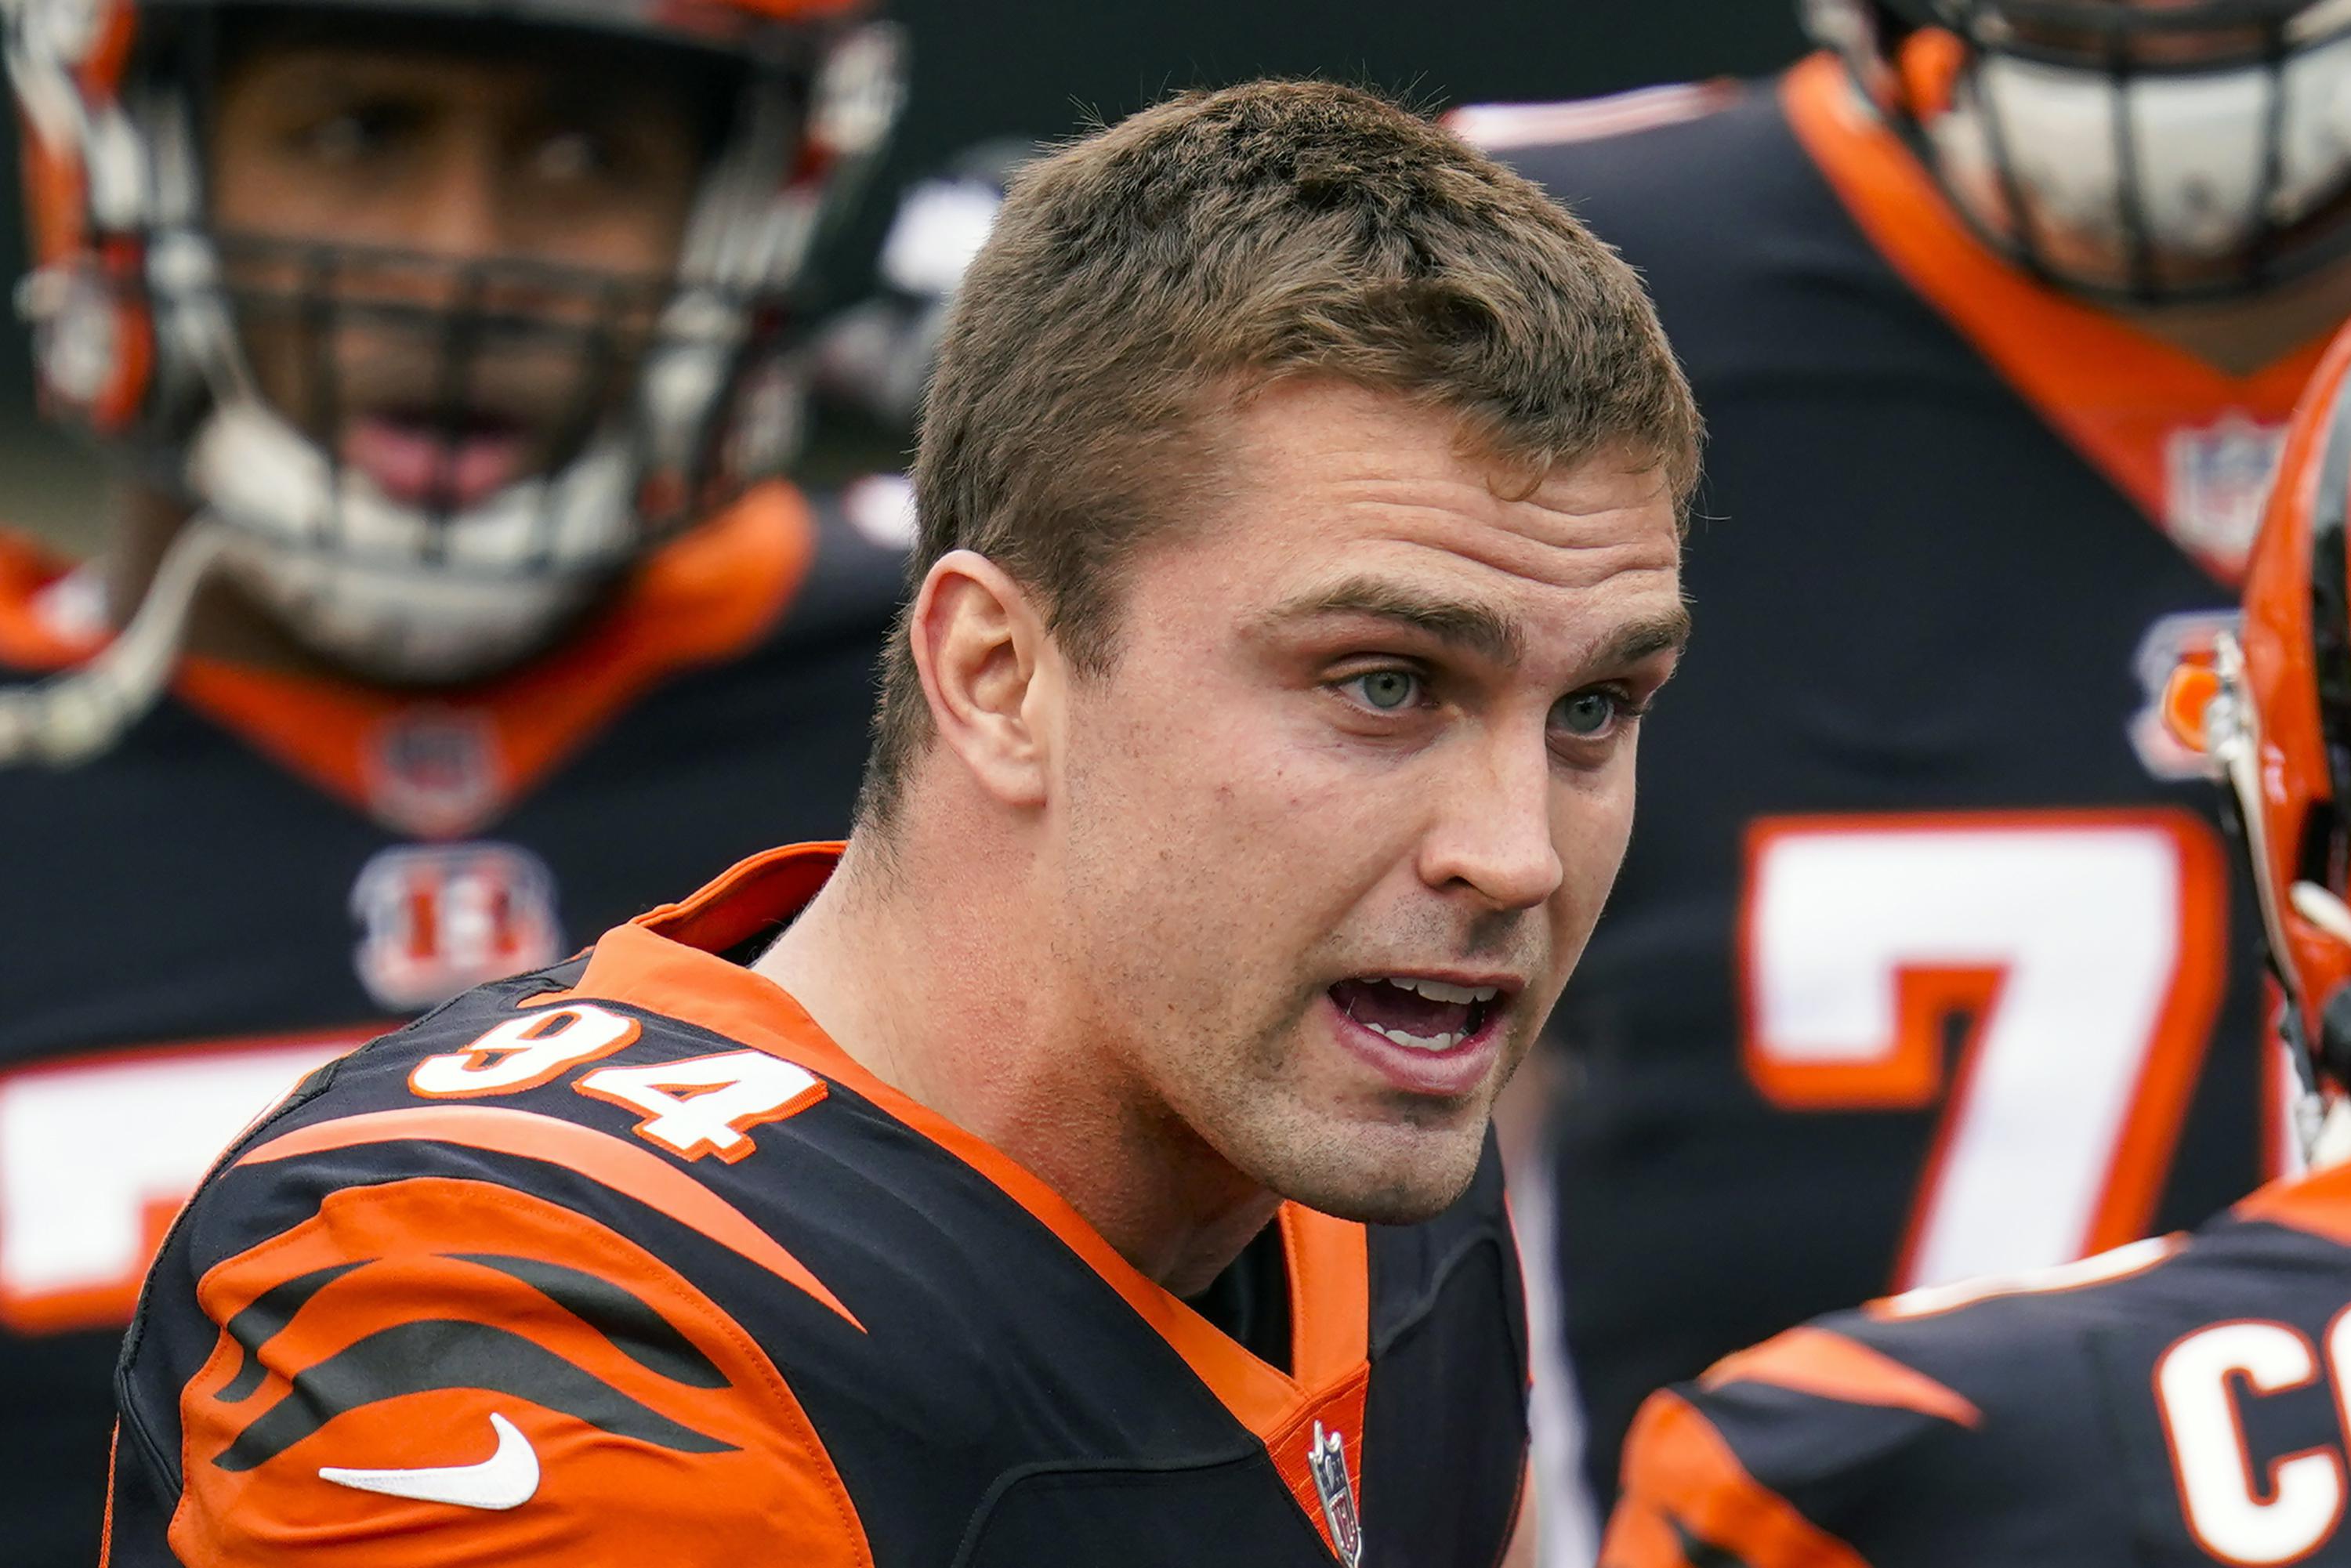 Bengals give DE Sam Hubbard 4year contract extension AP News